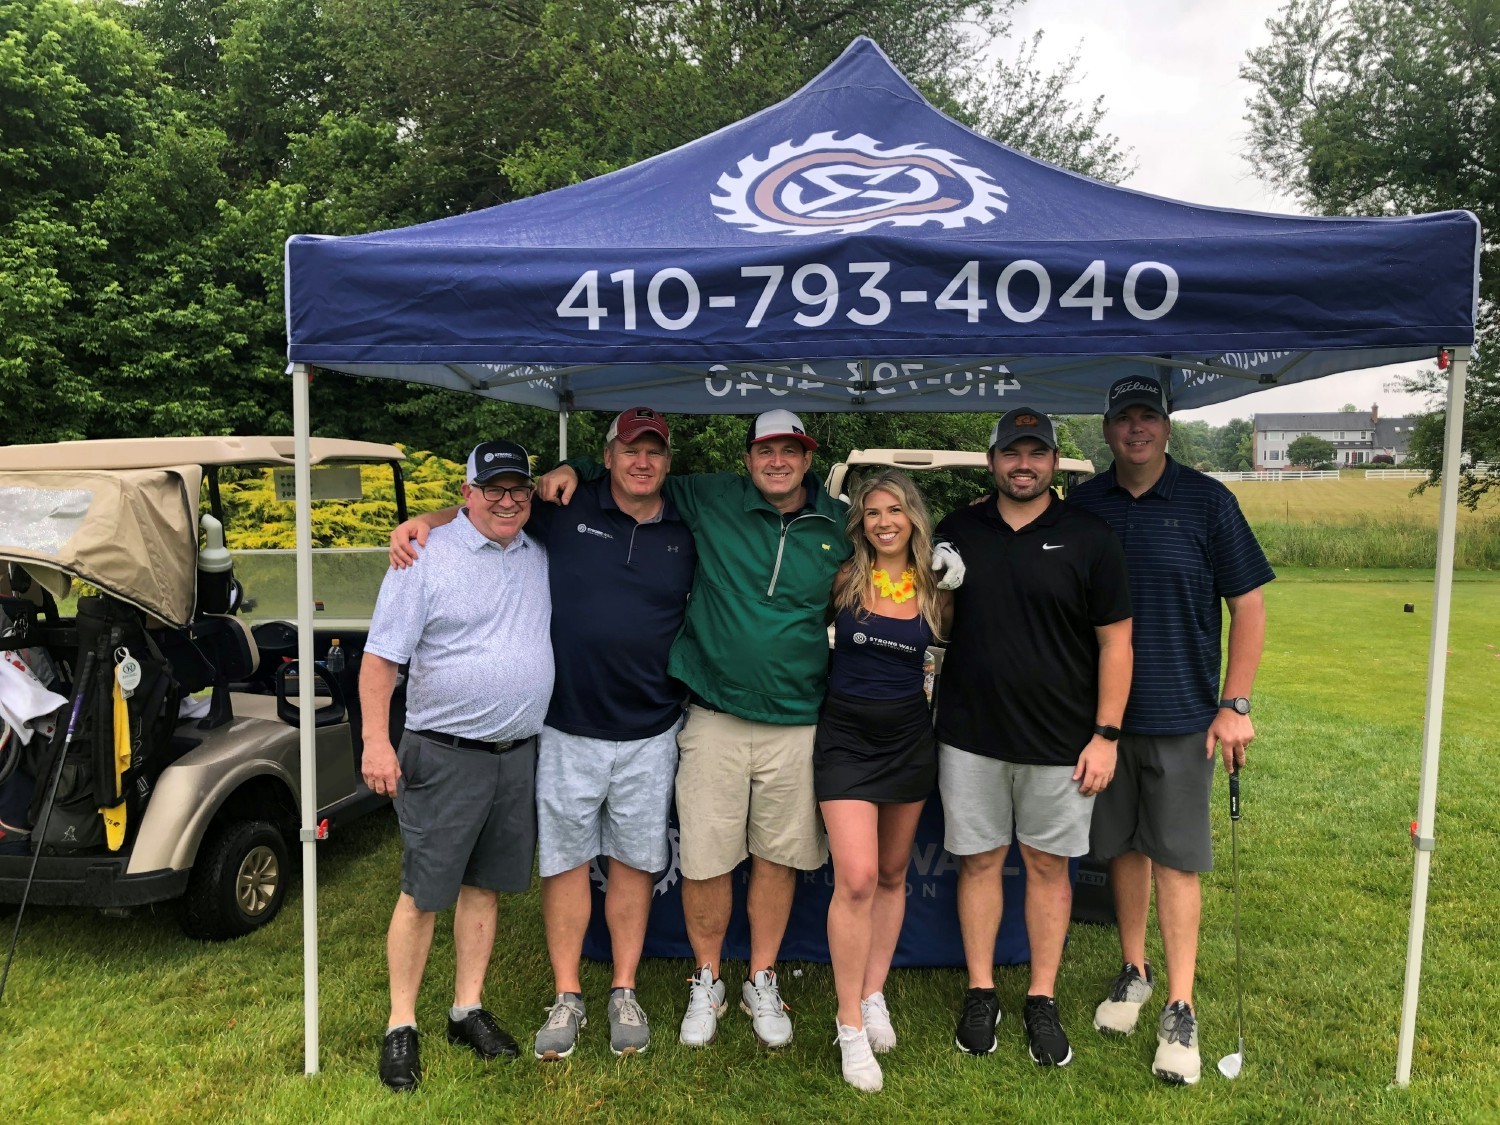 The Blue Goose National Pond's 37th Annual Golf Outing. Strong Wall was able to give back by sponsoring a hole!